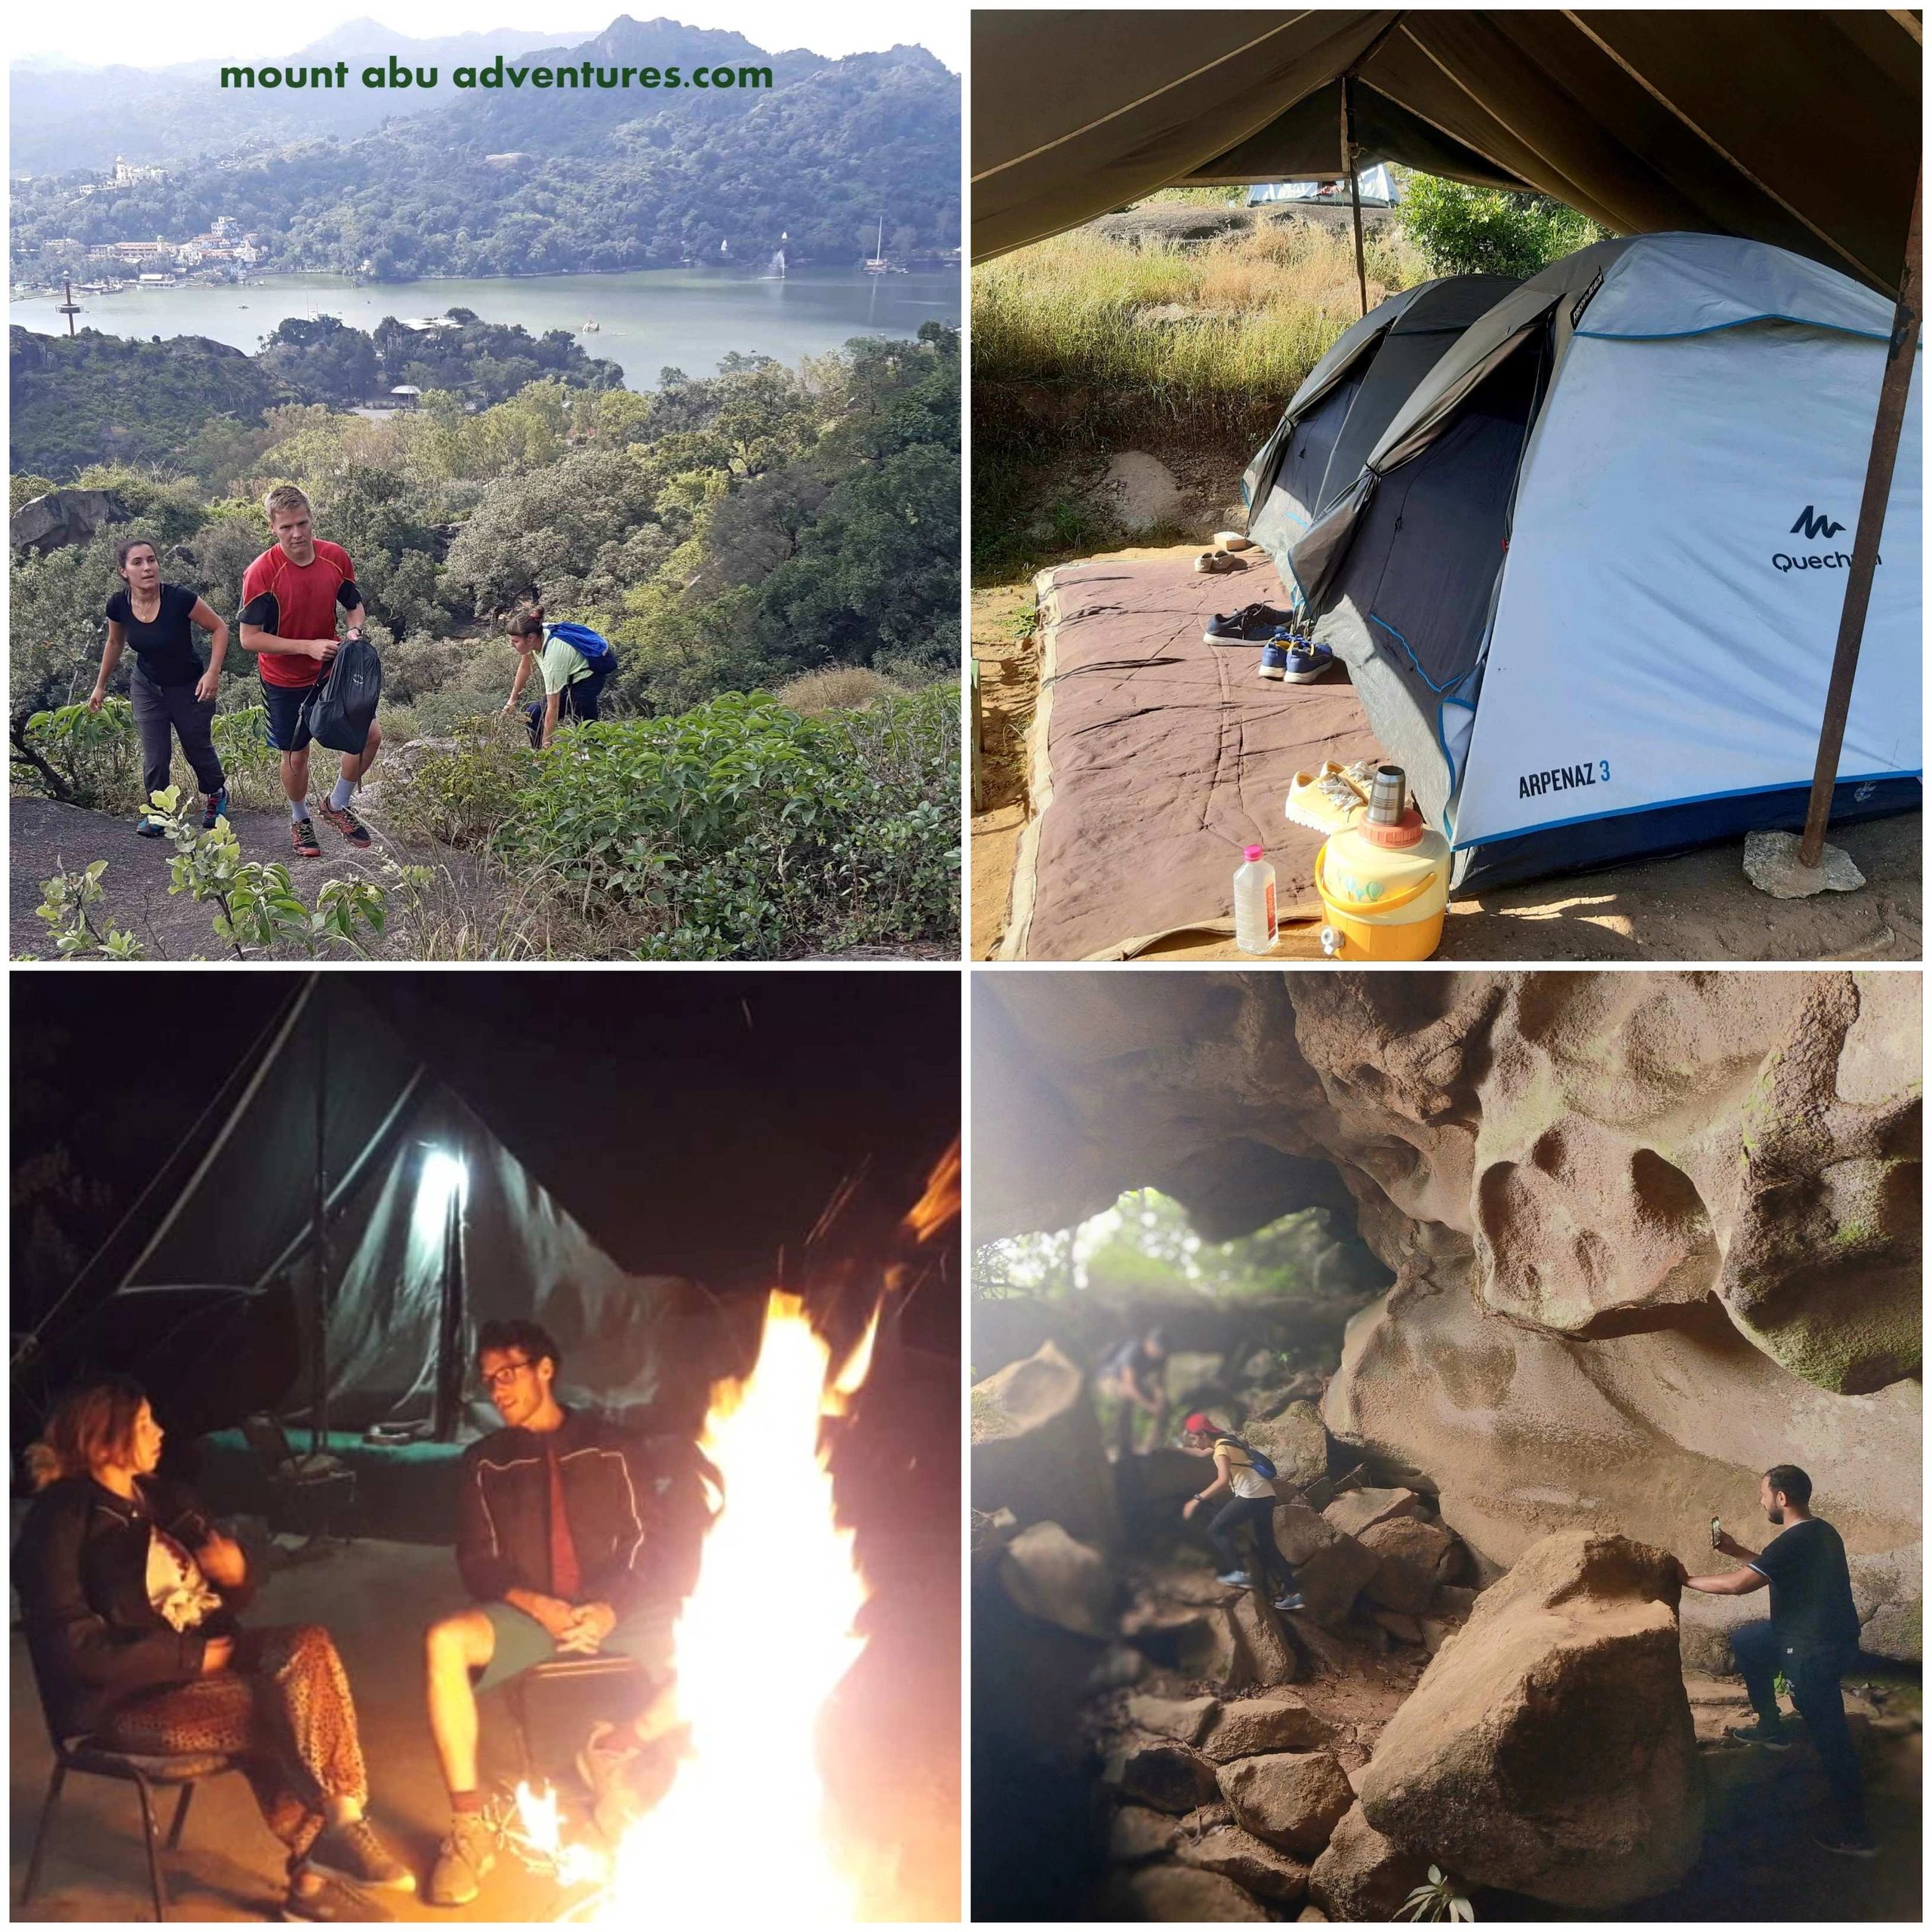 trekking camping in mount abu things to do in mount abu tourist hiking and camping in the jungle